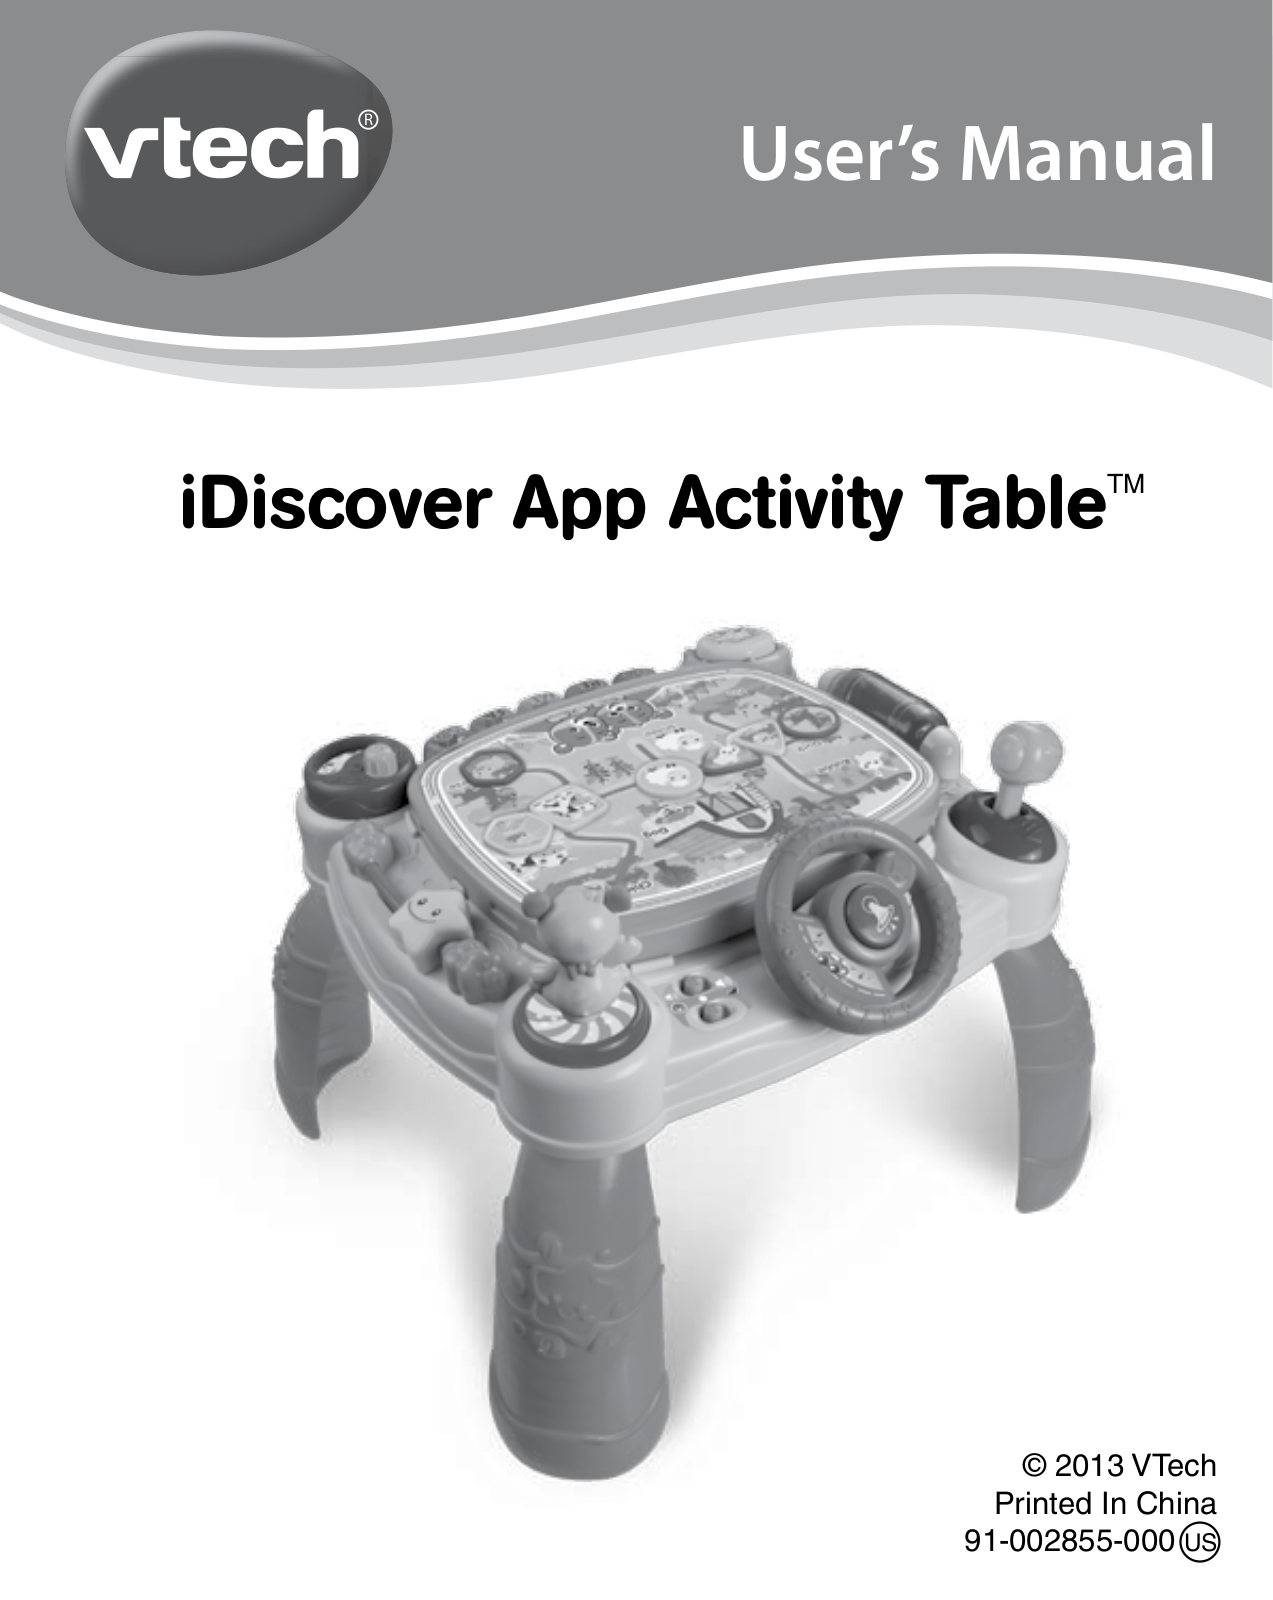 VTech iDiscover App Activity Table Owner's Manual